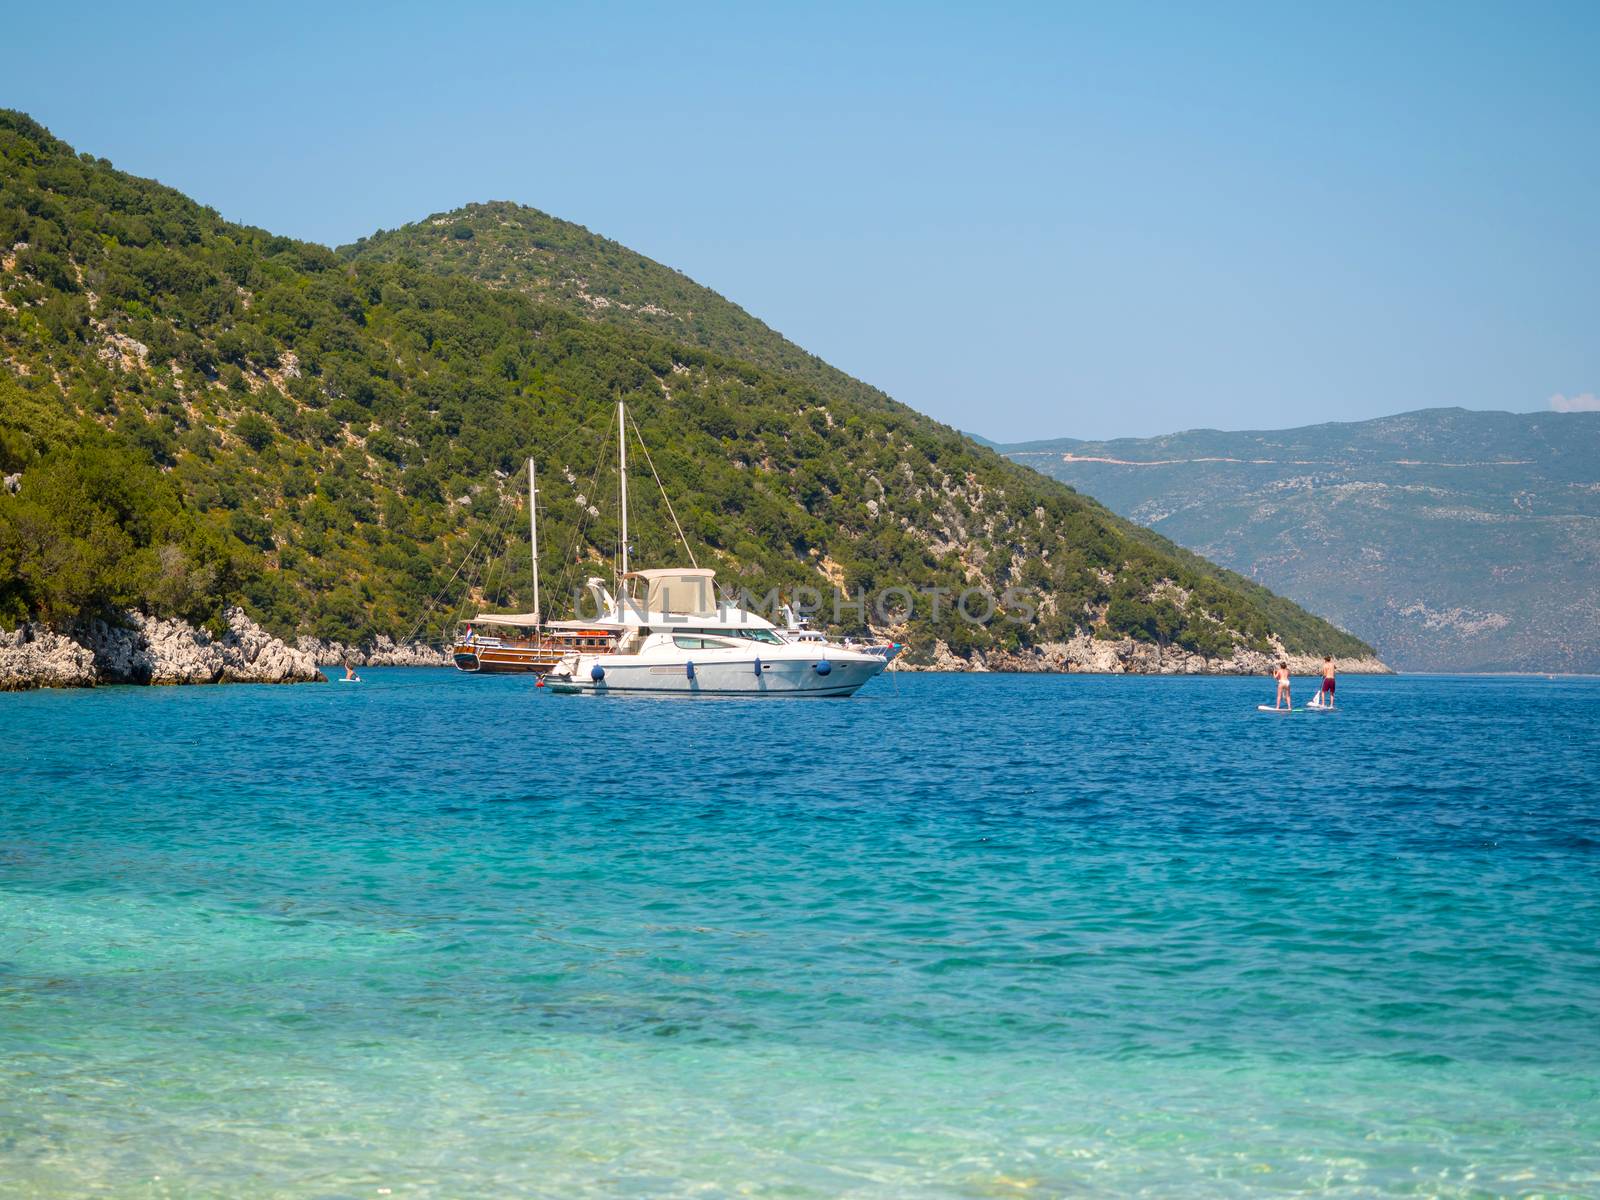 Boats in a shore and people enjoy the summer in Kefalonia island, Greece